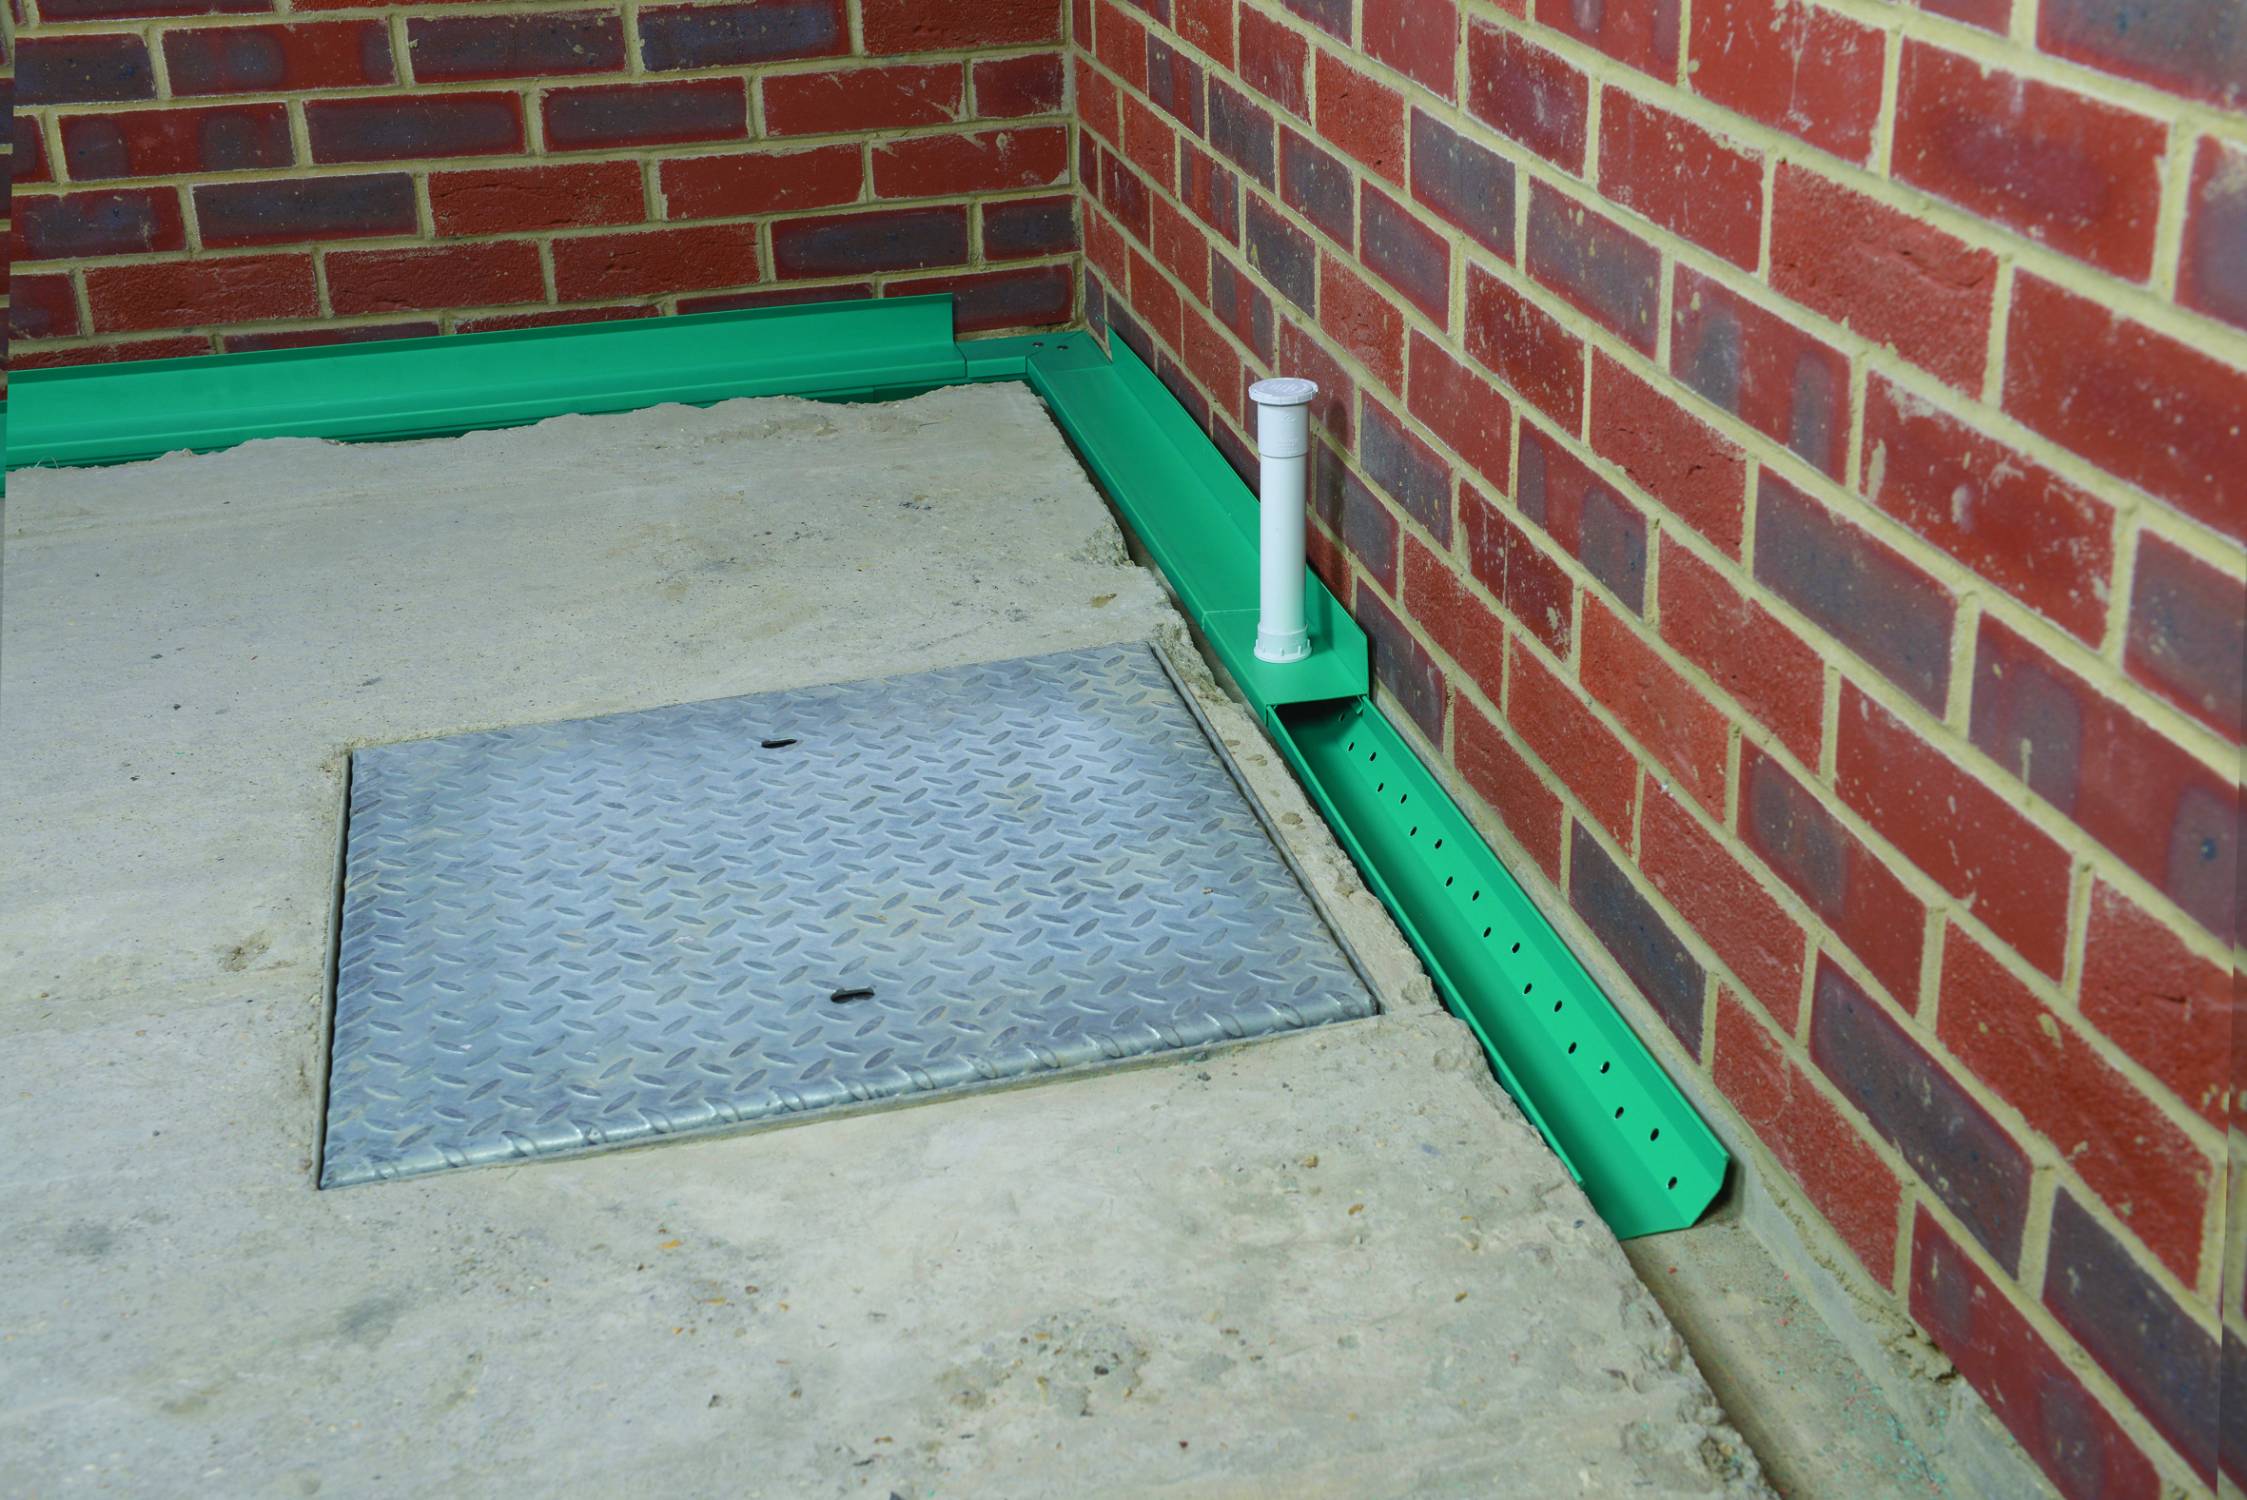 Oldroyd Aquadrain Perimeter Drainage Channel - Provides Additional Protection in Basement Waterproofing Applications, Used in Conjunction with Cavity Drainage Systems 